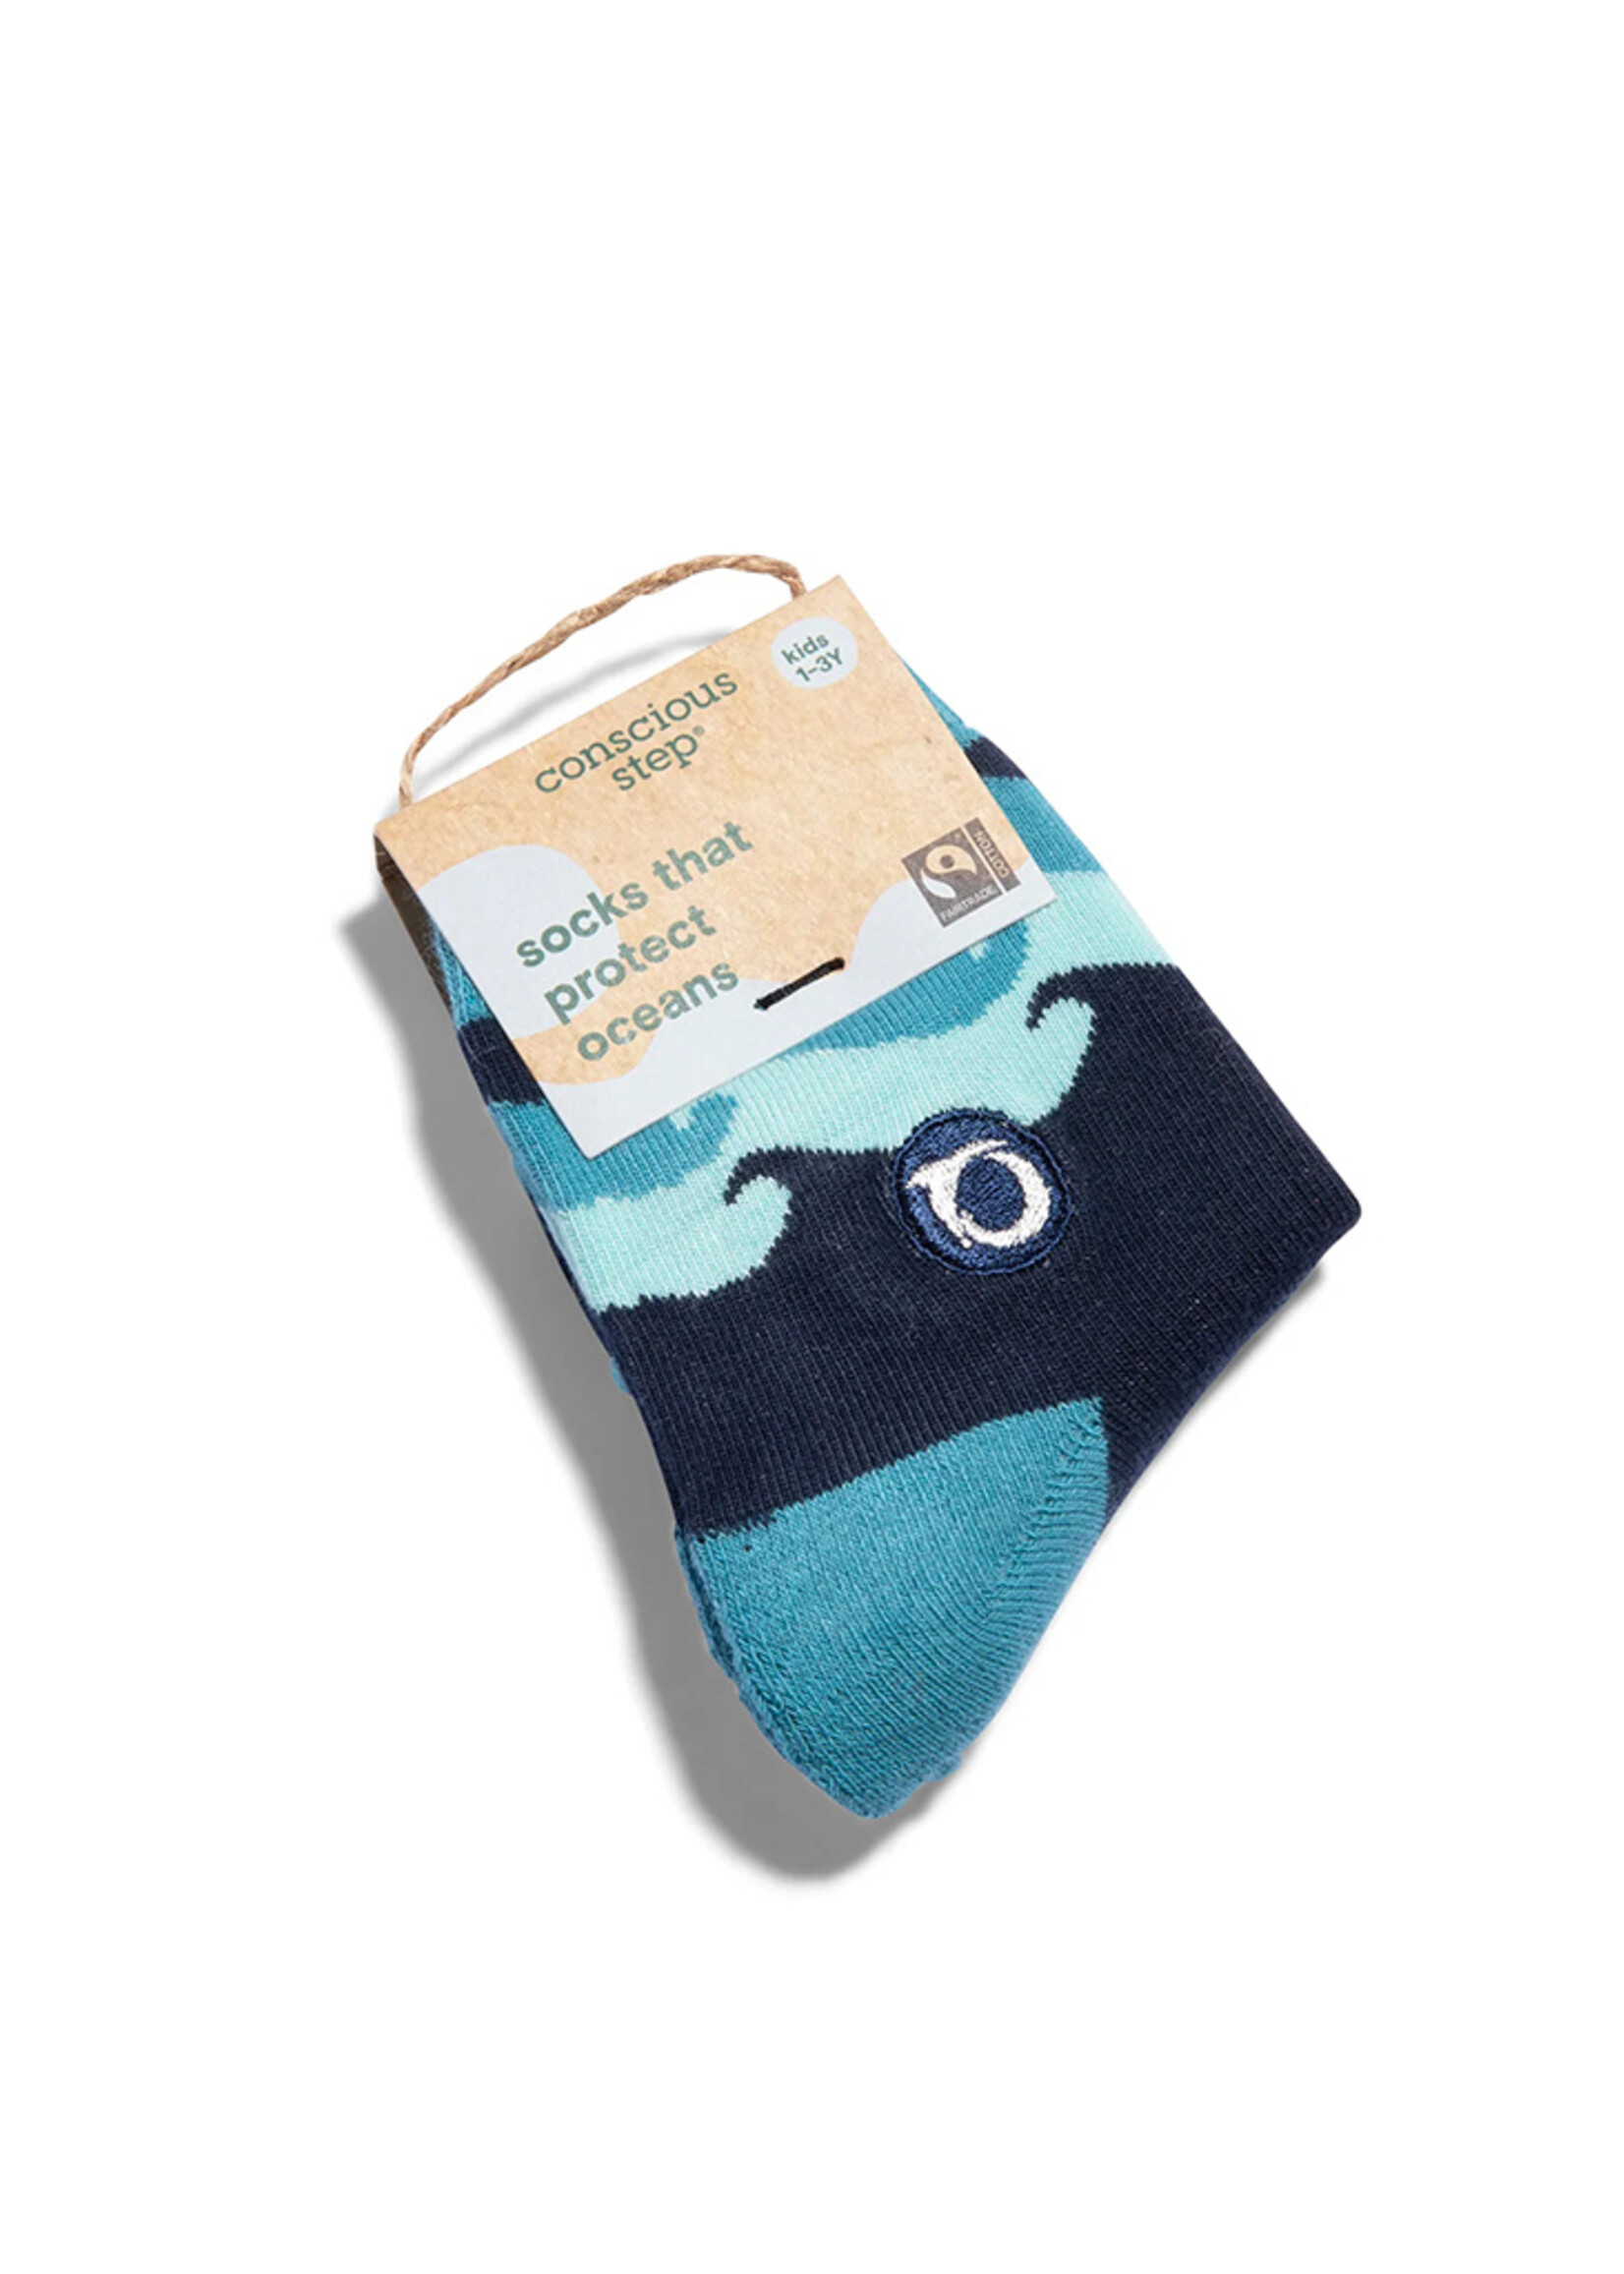 Conscious Step Kids Socks that Protect Oceans - Toddler